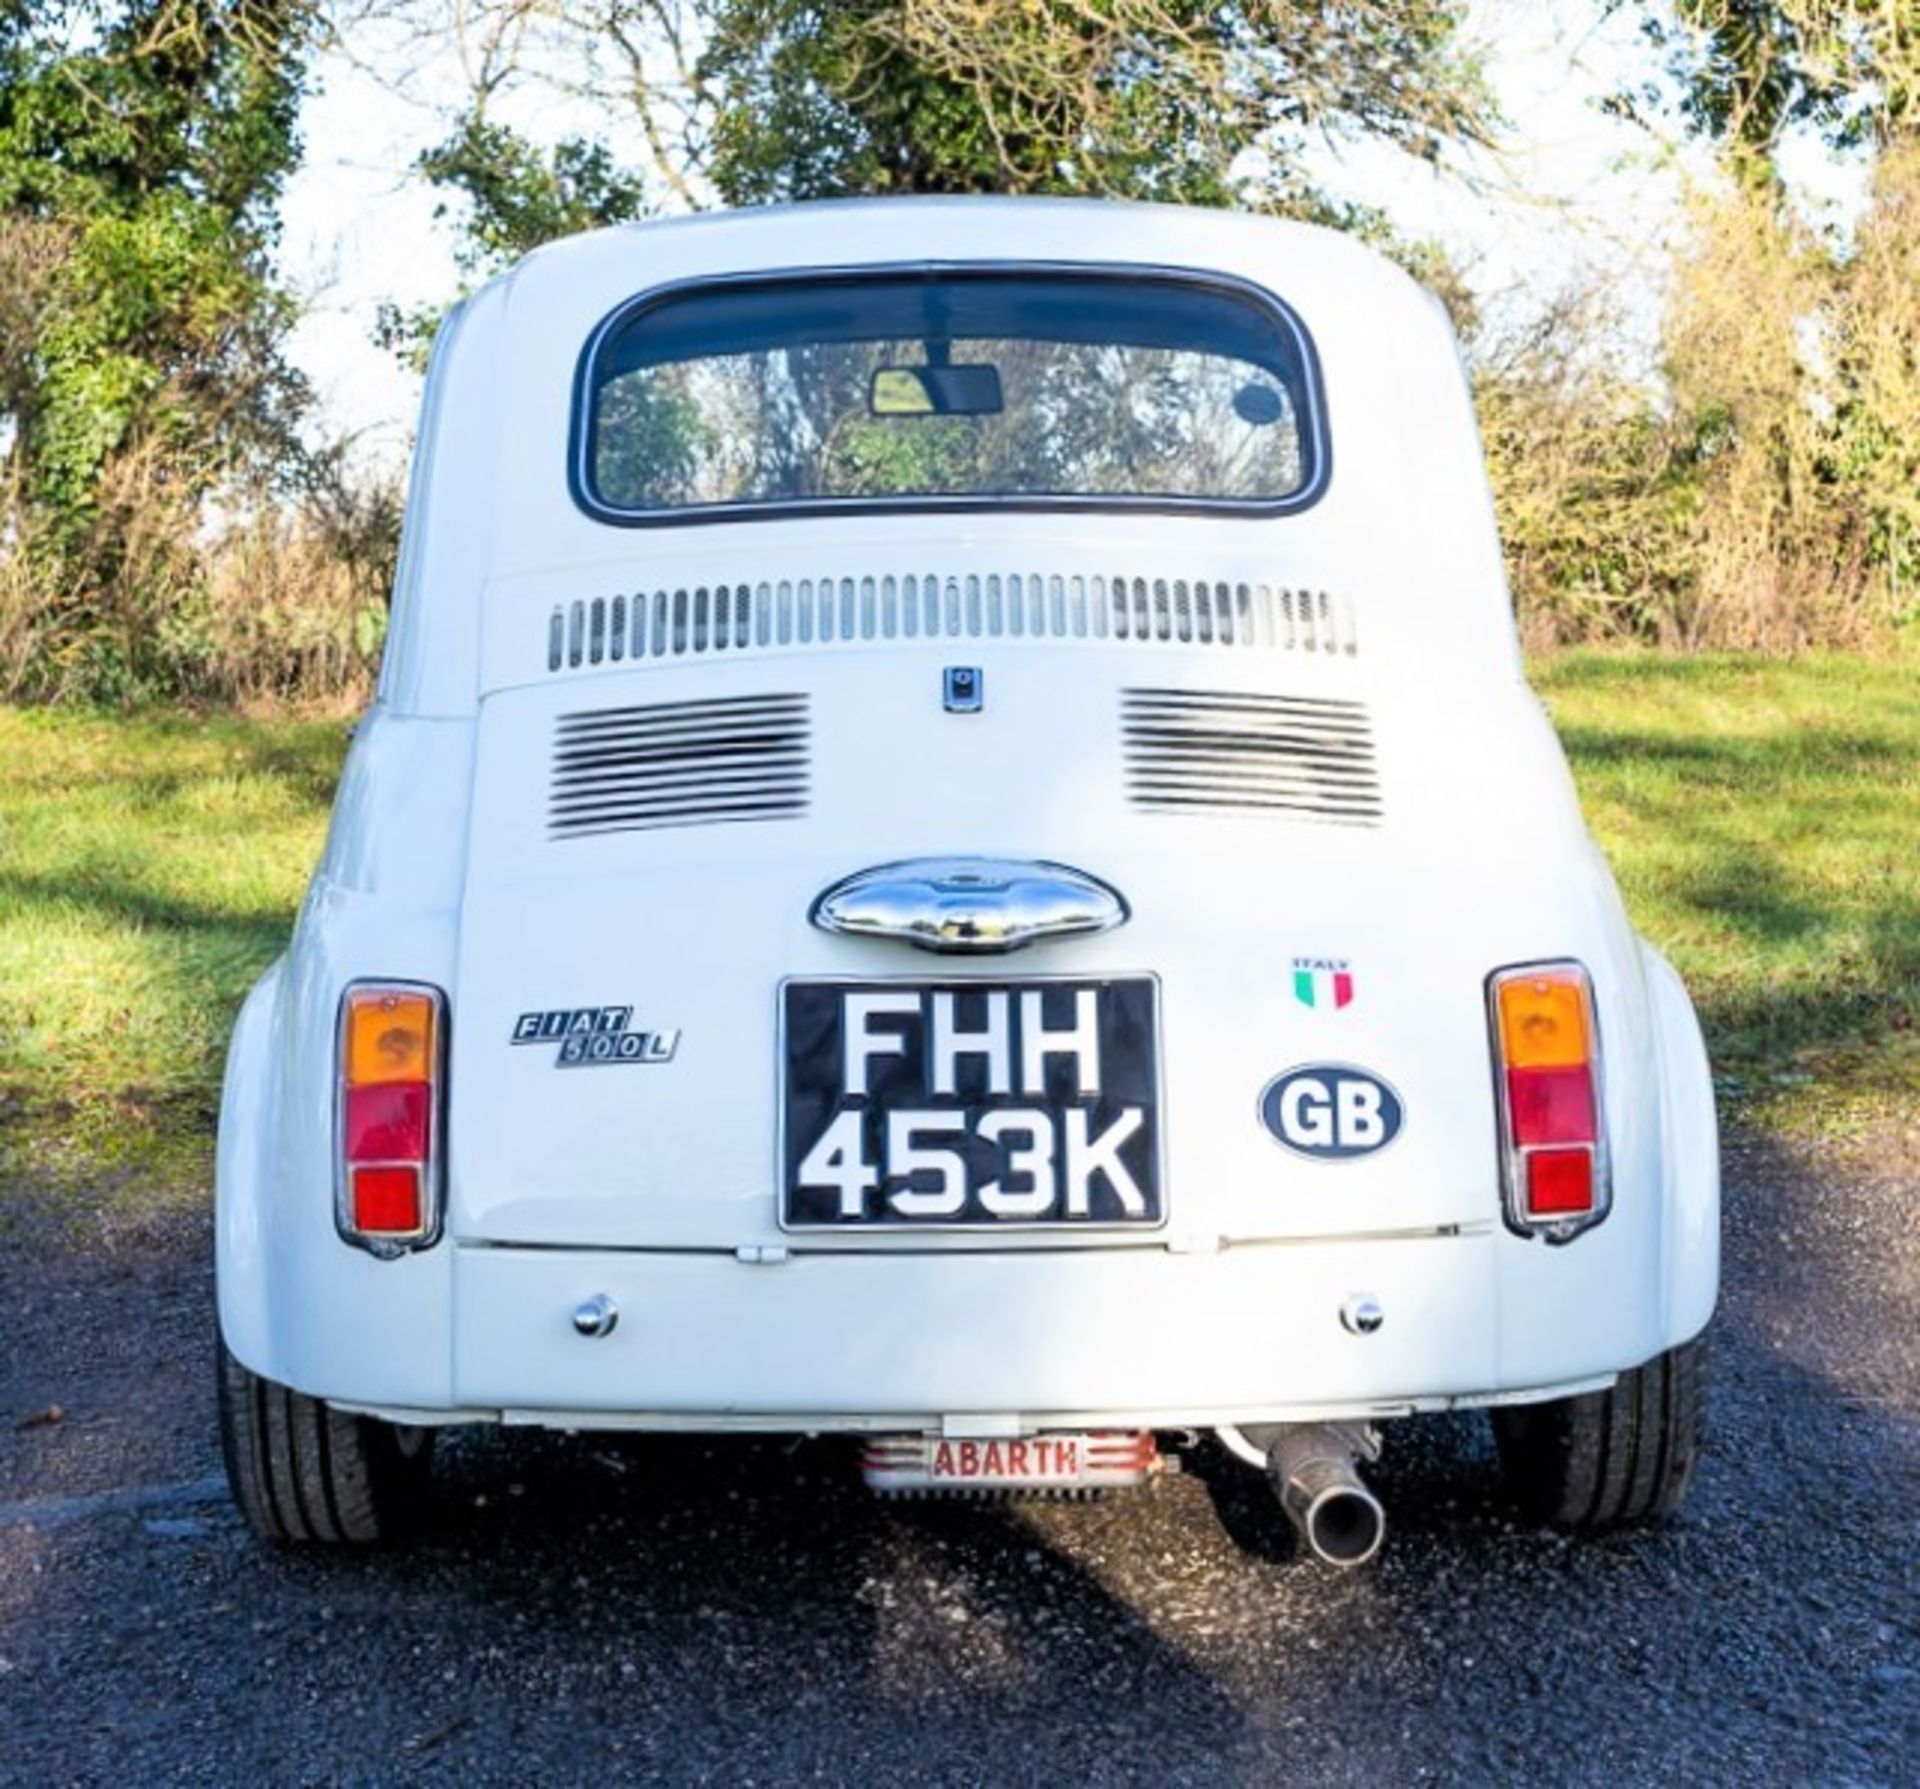 1972 FIAT 500 ABARTH TRIBUTE Registration Number: FHH 453K             Chassis Number: TBA - Image 7 of 16